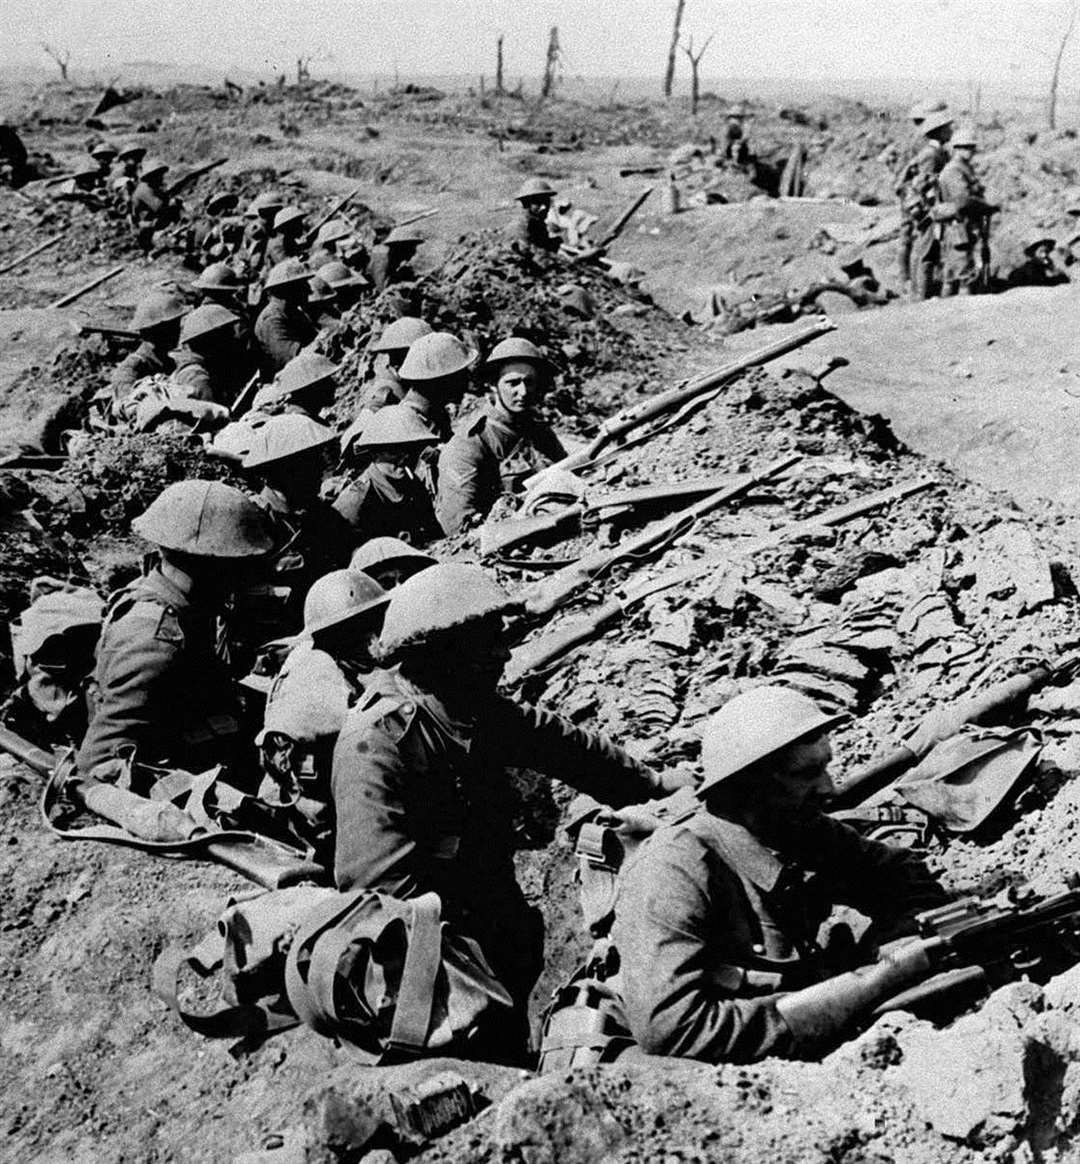 Soldiers on the Western Front during the First World War